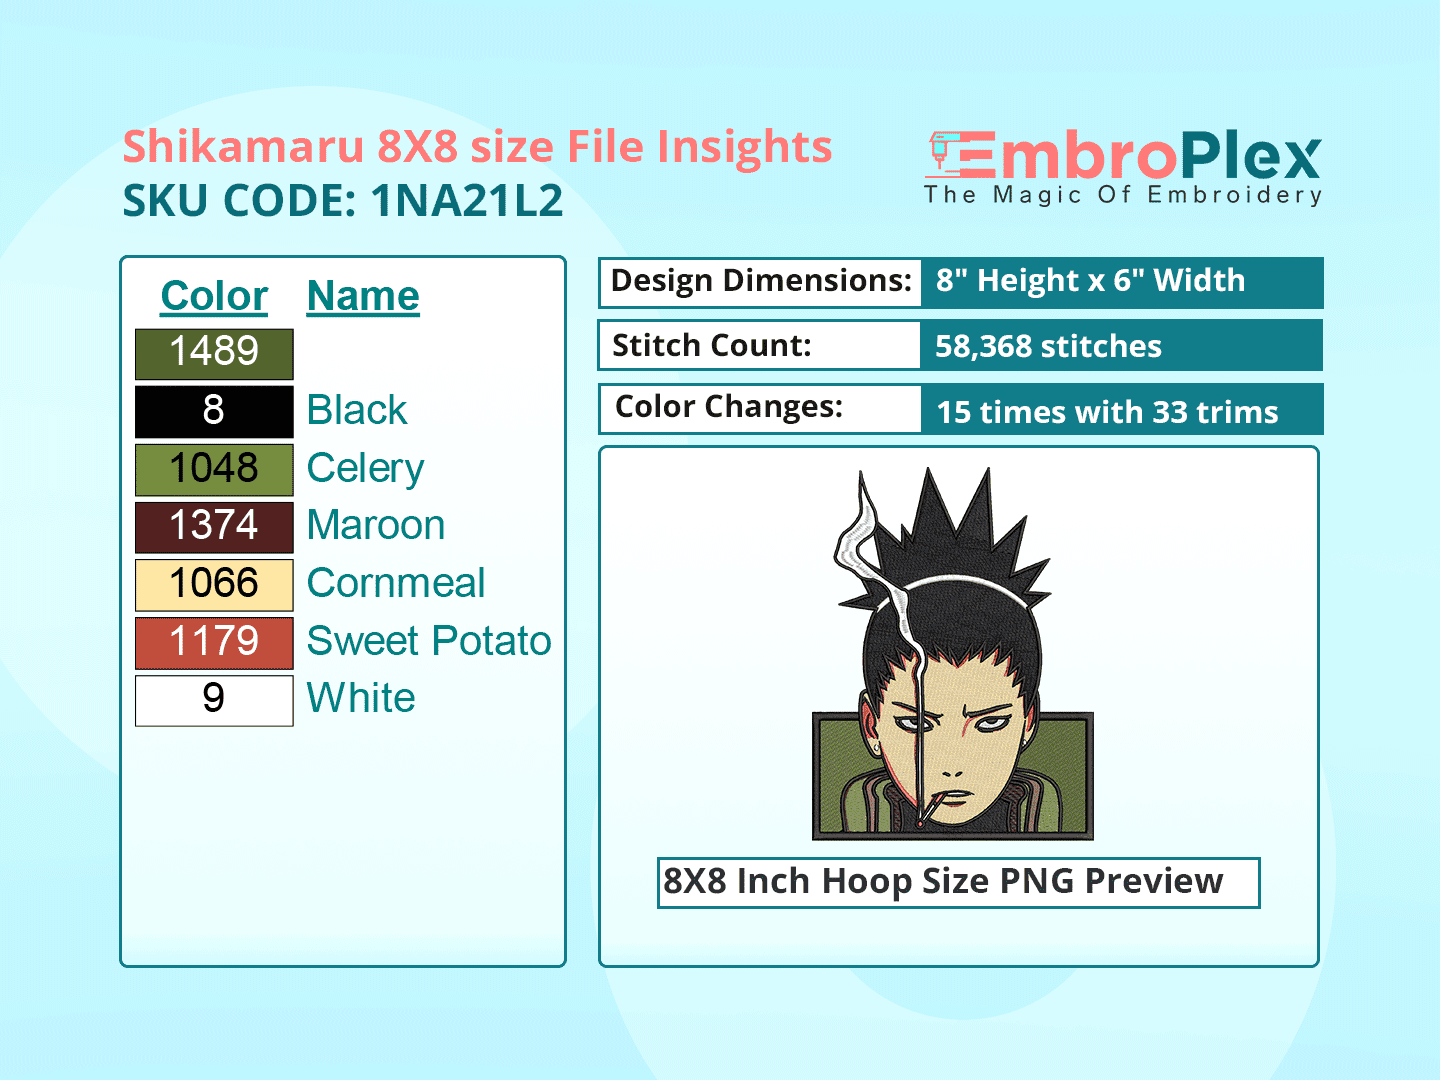 Anime-Inspired  Shikamaru Nara Embroidery Design File - 8x8 Inch hoop Size Variation overview image